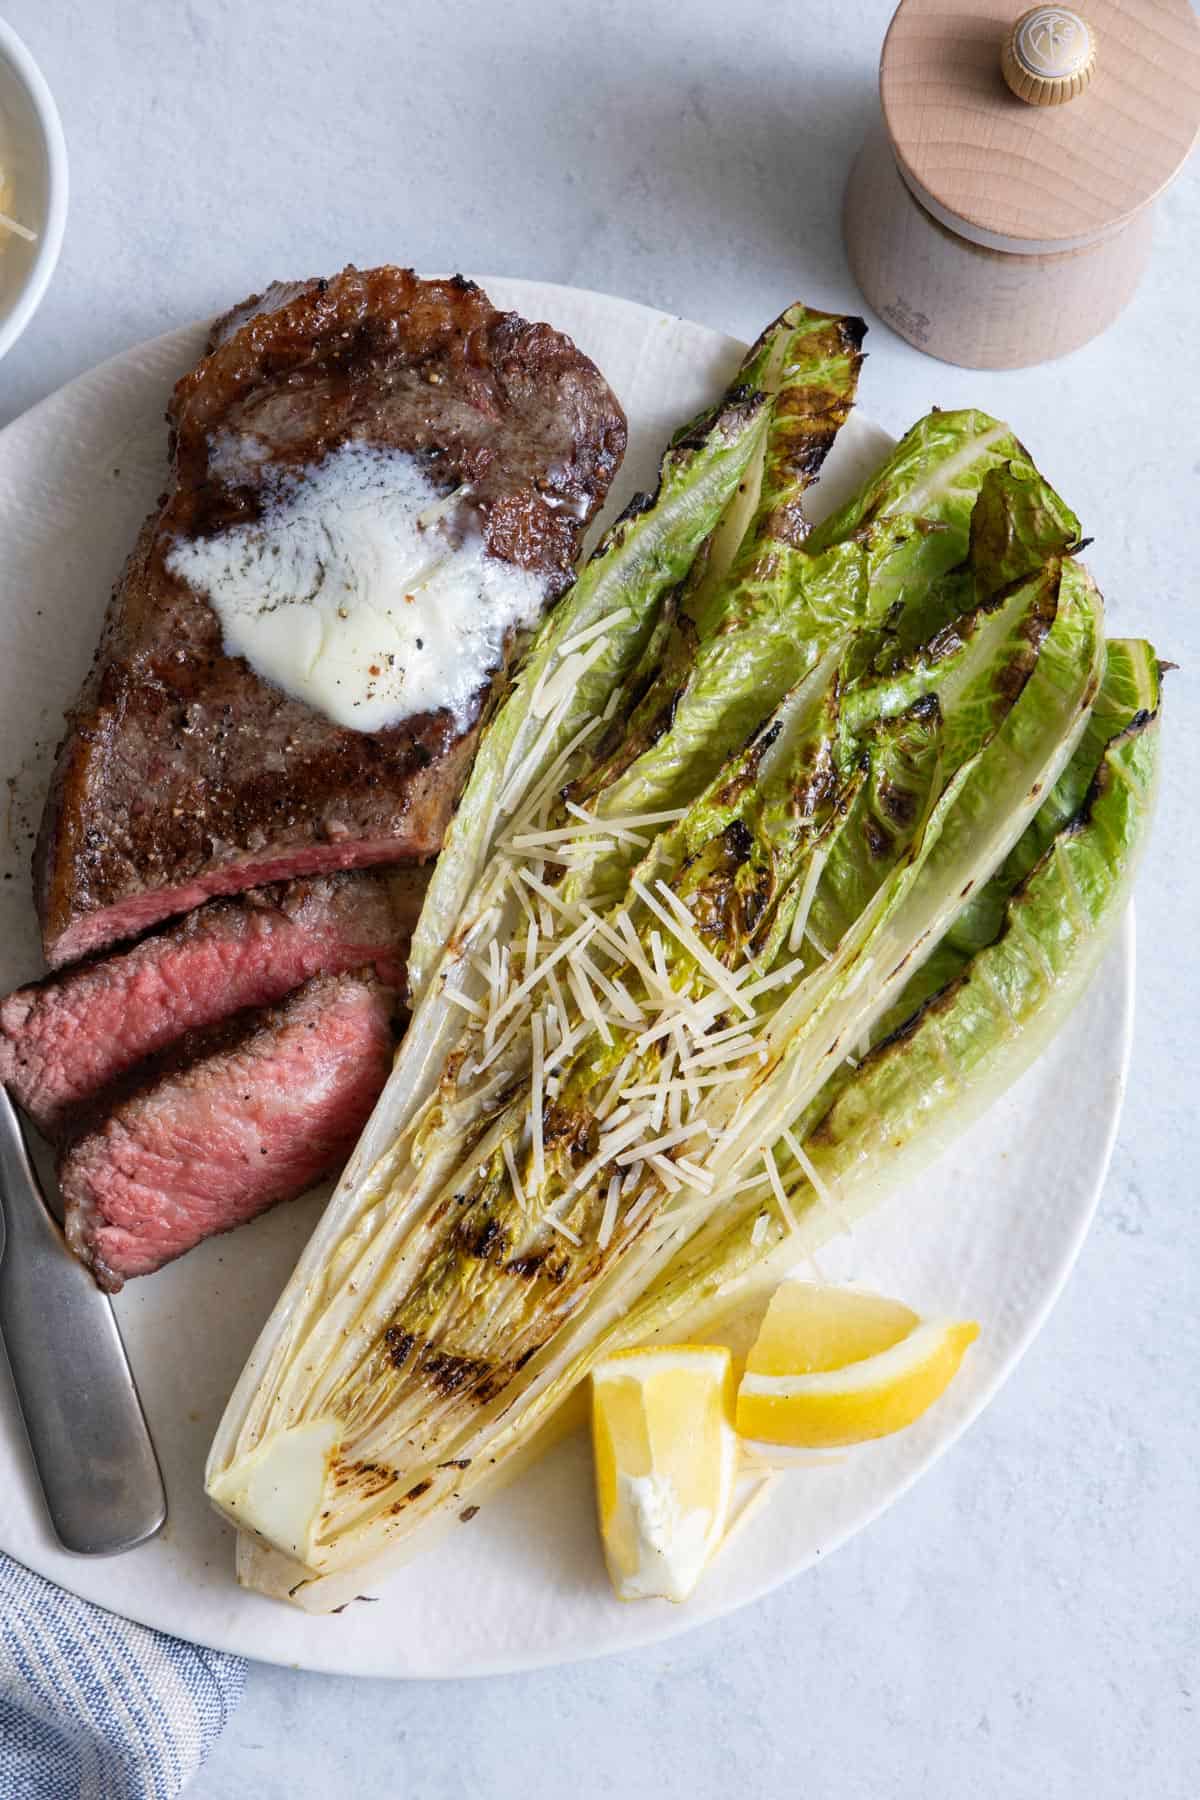 Grilled romaine lettuce garnished with shredded parmesan served with grilled steak with butter on top.